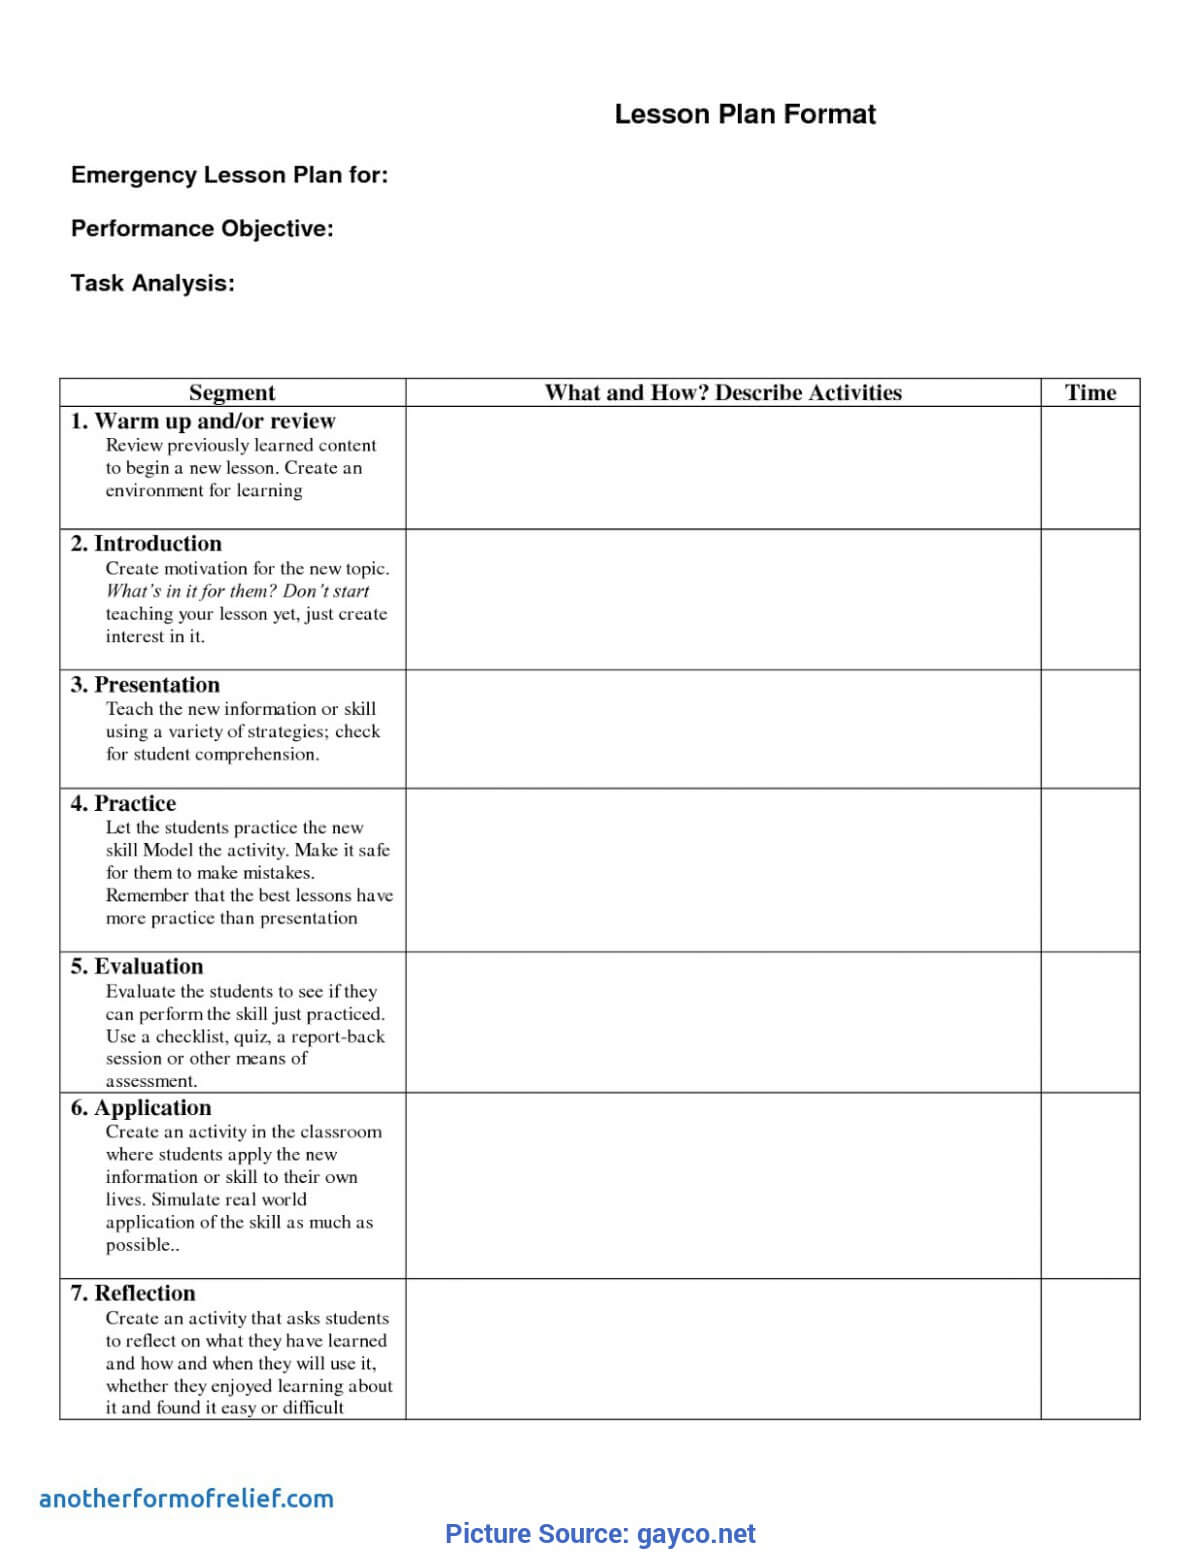 Special Lessons Learned Checklist Template 1 Lessons Learnt In Lessons Learnt Report Template